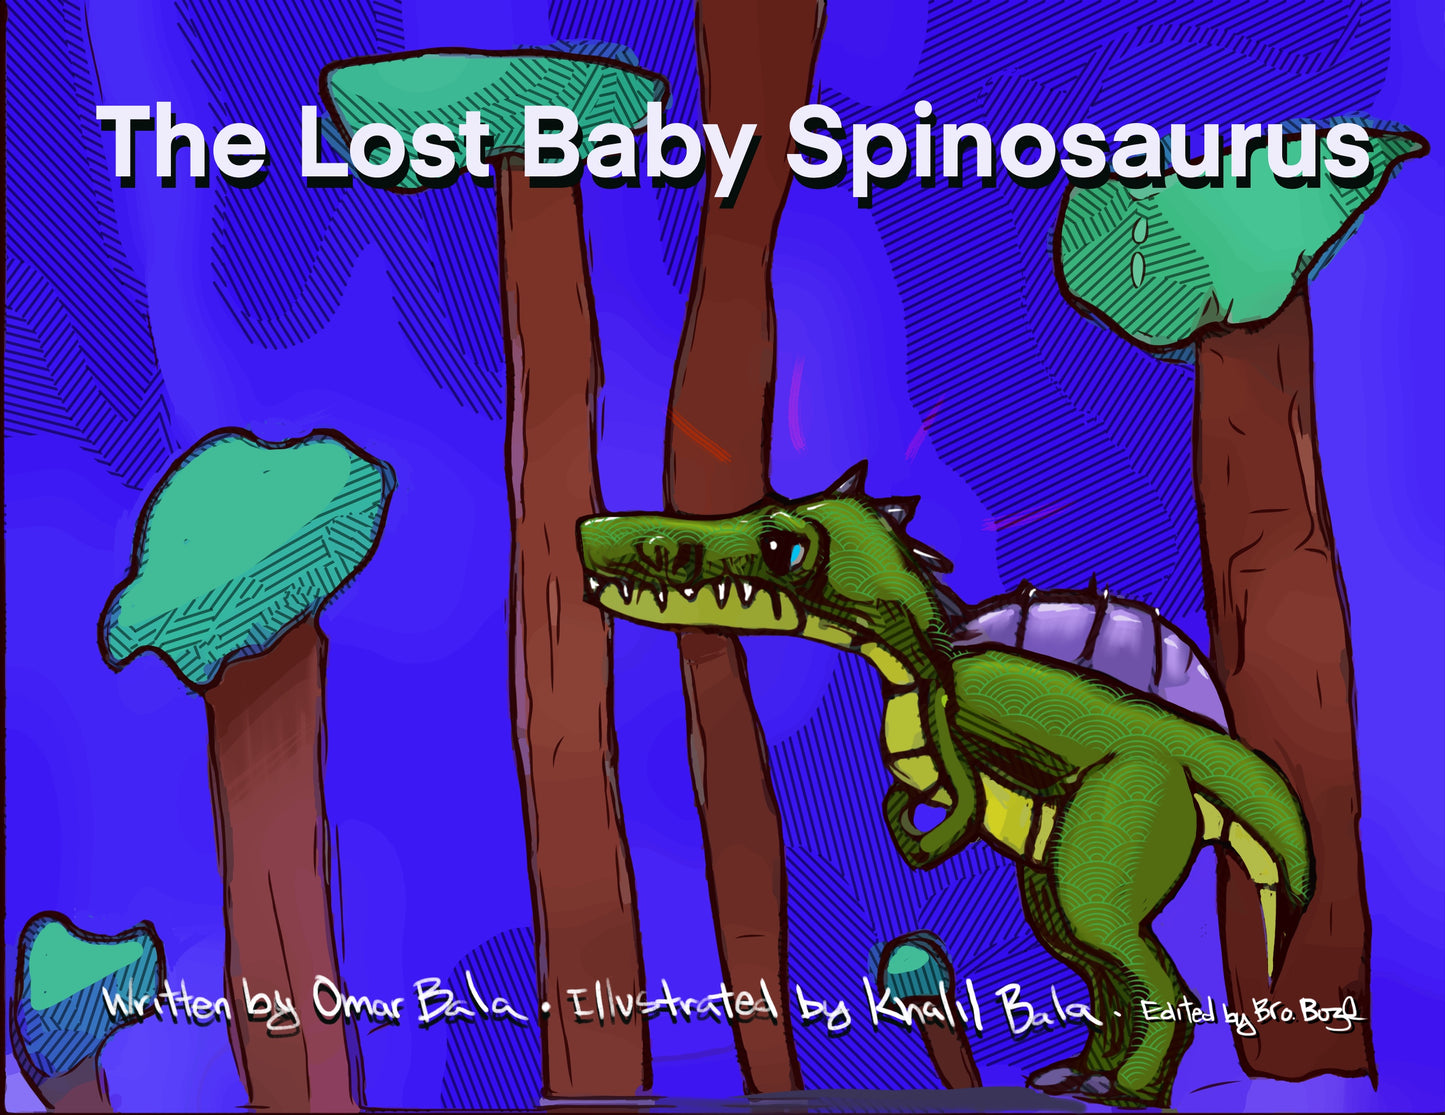 The Lost Baby Spinosaurus